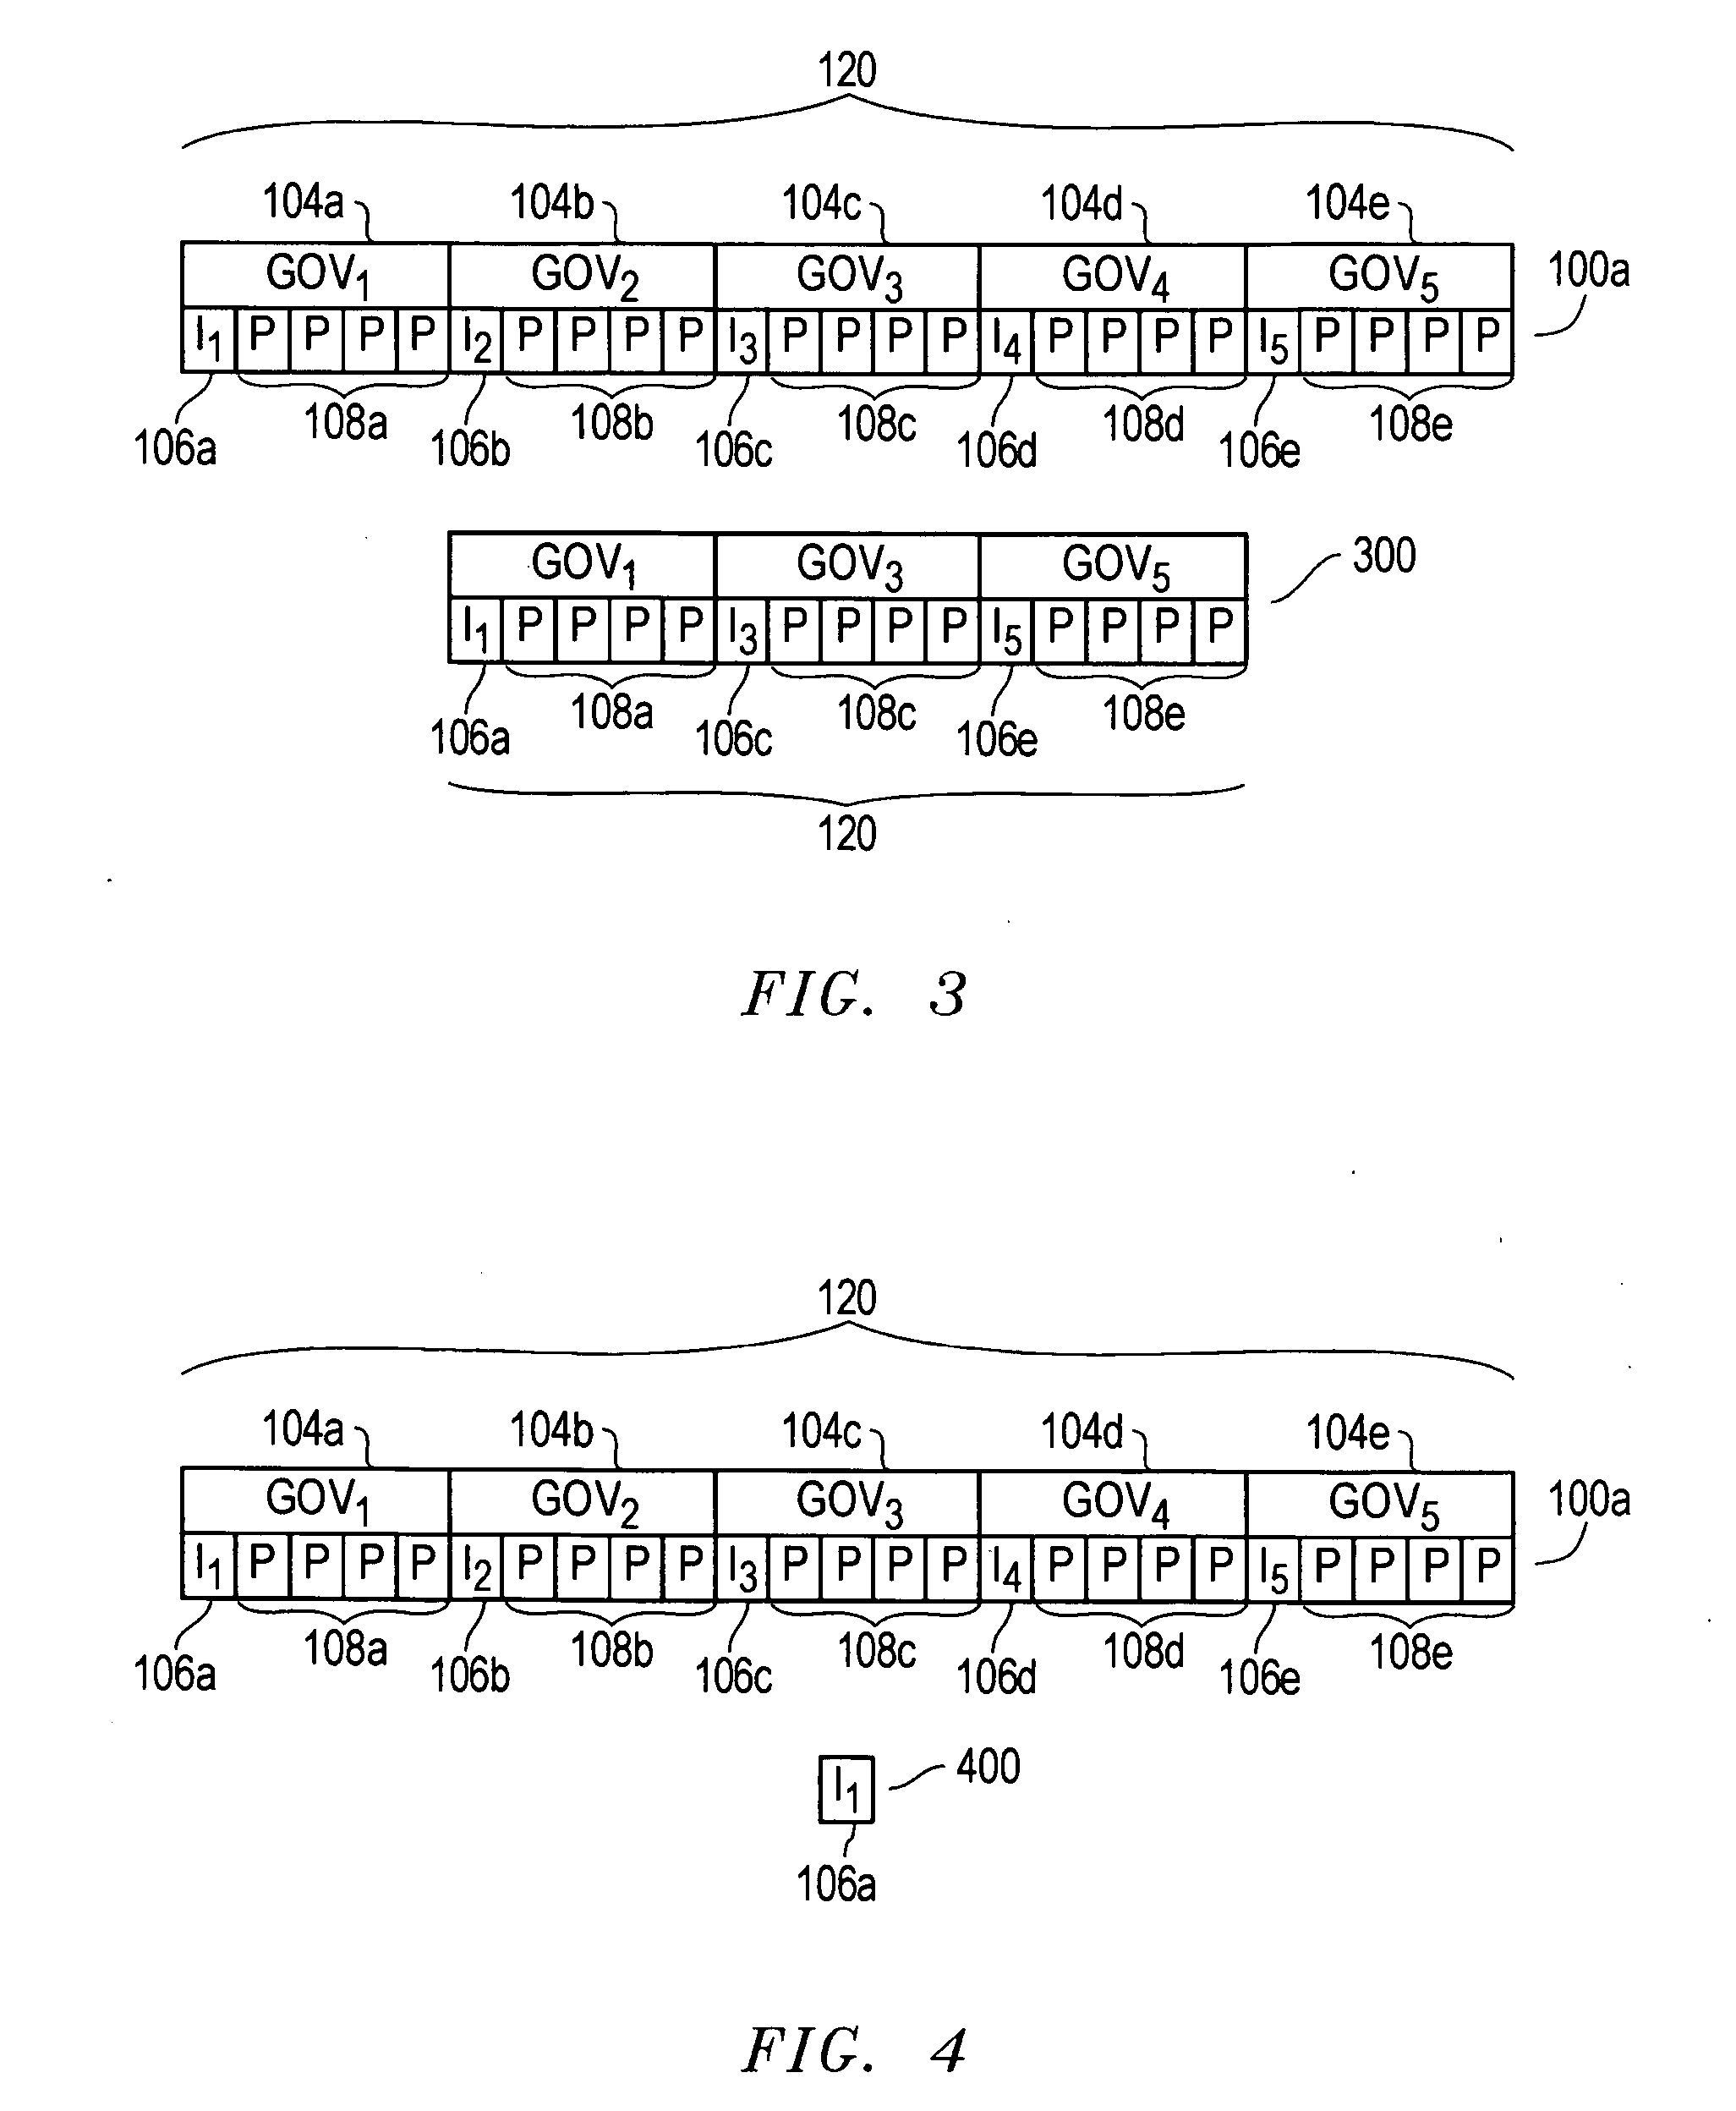 Systems and methods for media stream processing